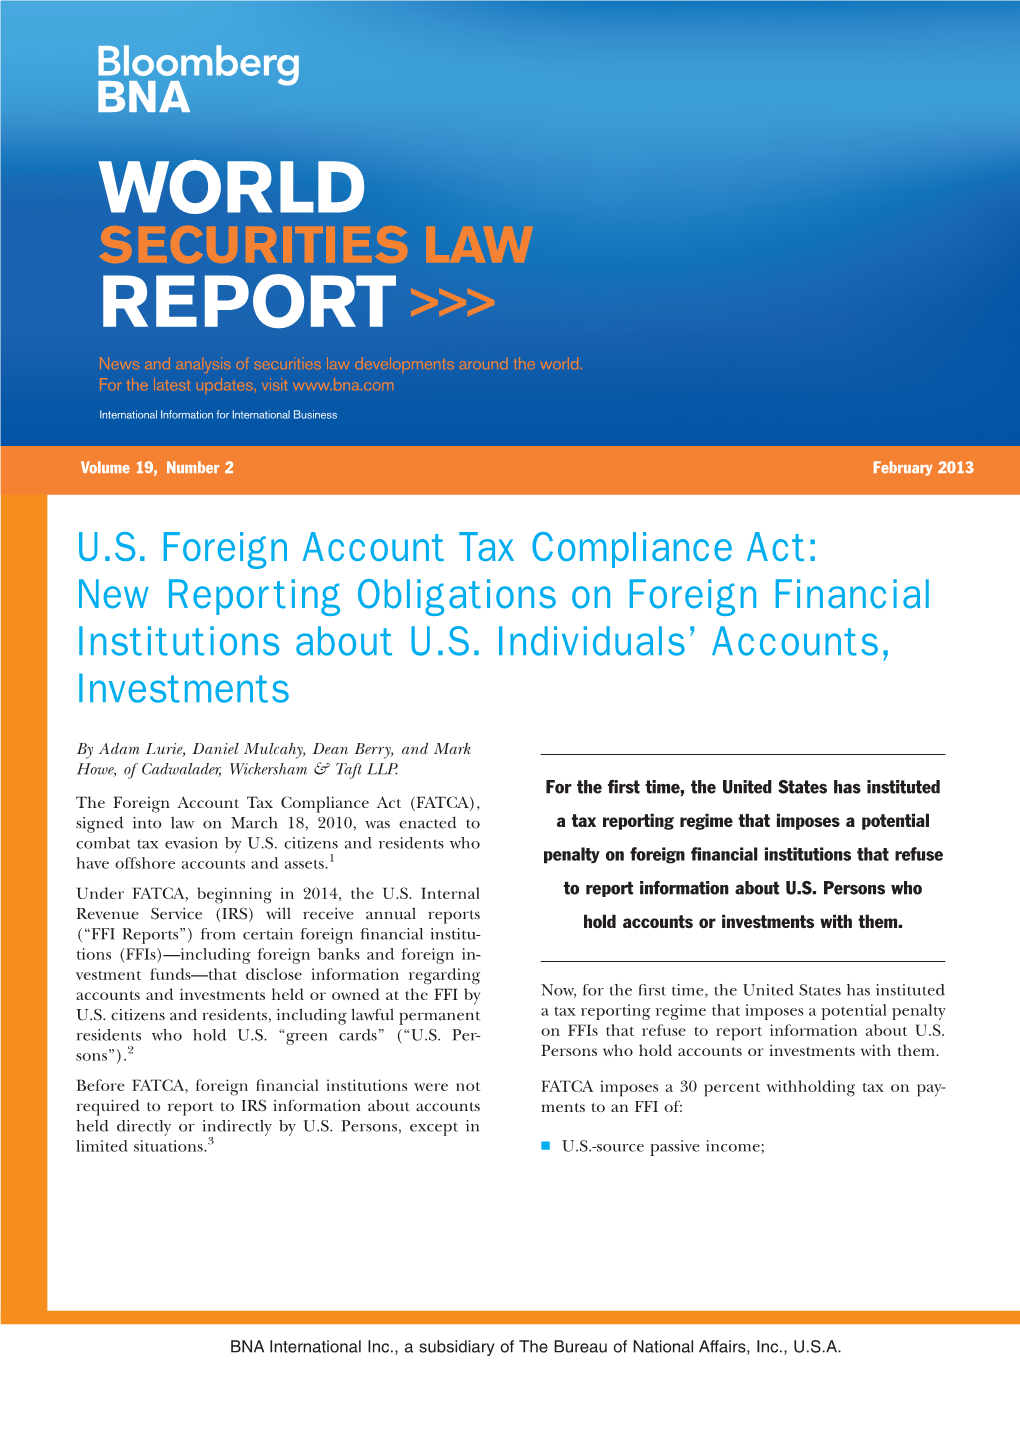 New Reporting Obligations on Foreign Financial Institutions About U.S. Individuals’ Accounts, Investments